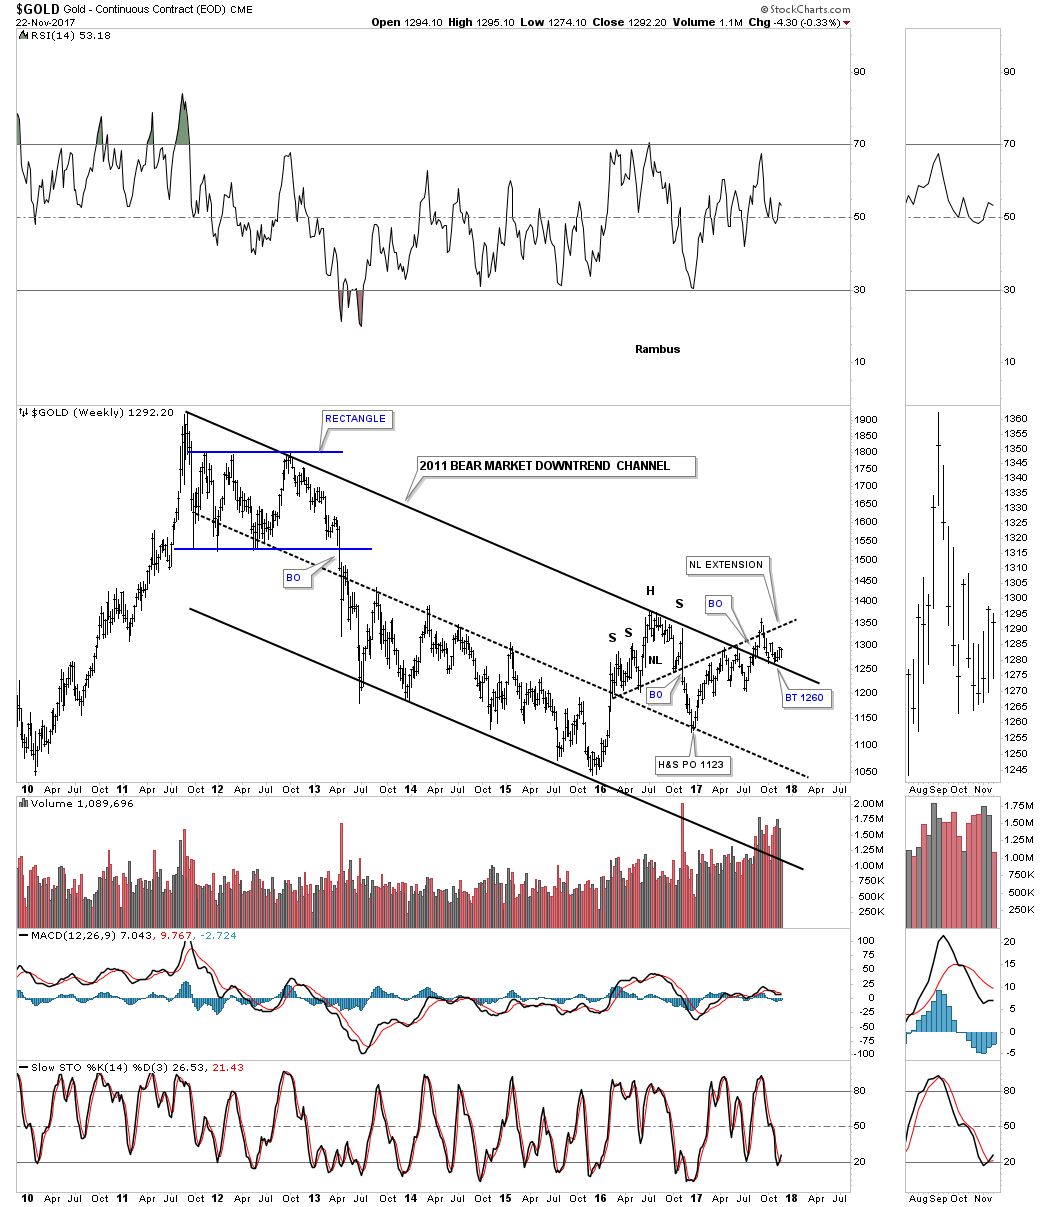 Gold Weekly 2010-2017